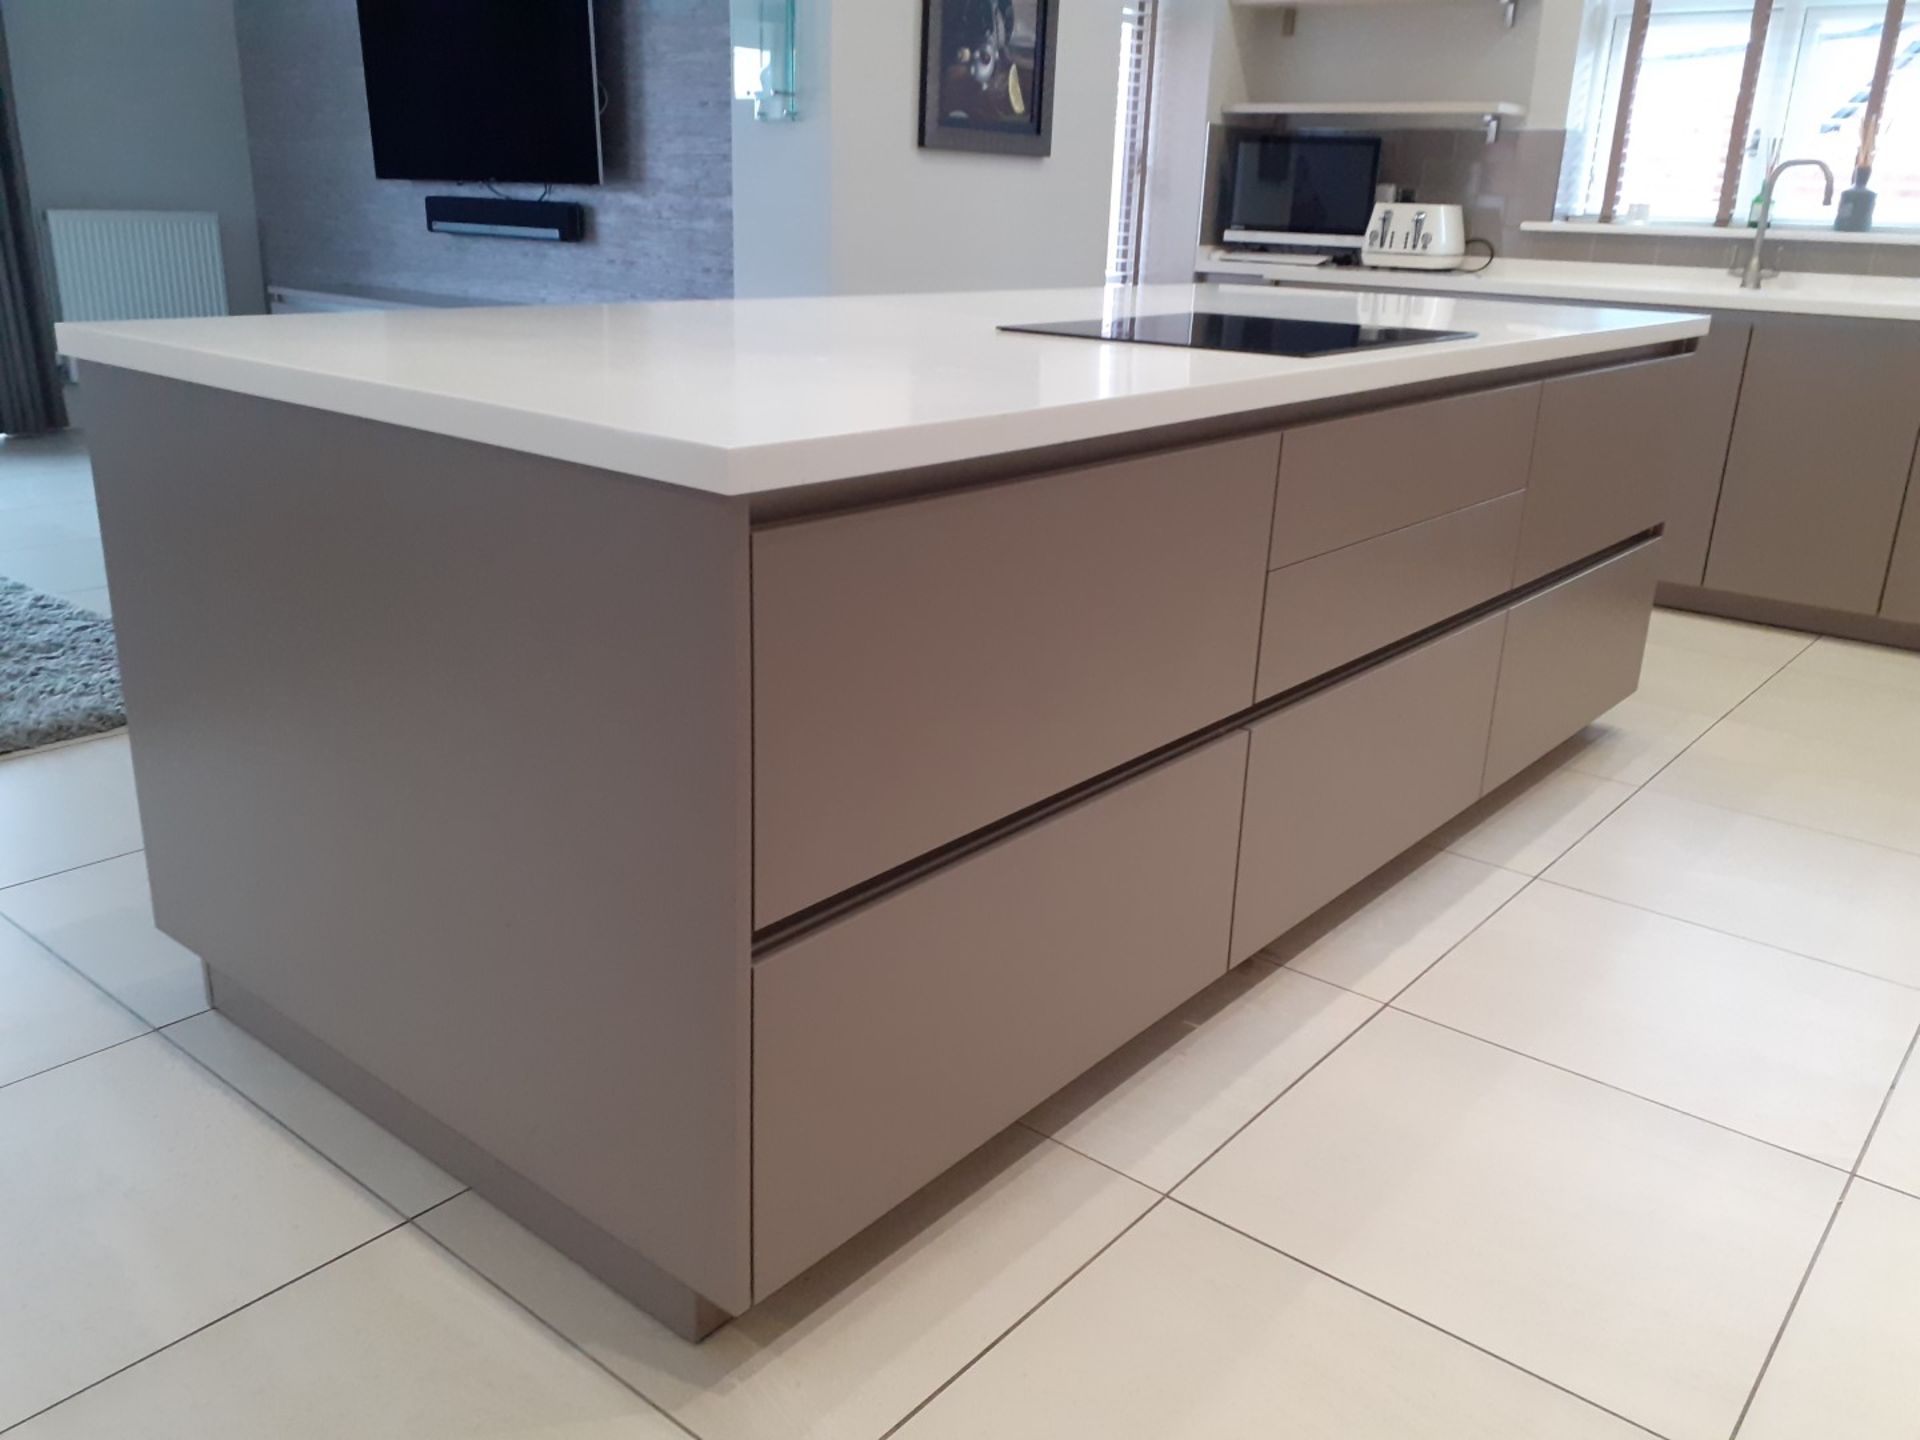 1 x SieMatic Handleless Fitted Kitchen With Intergrated NEFF Appliances, Corian Worktops And Island - Image 6 of 92